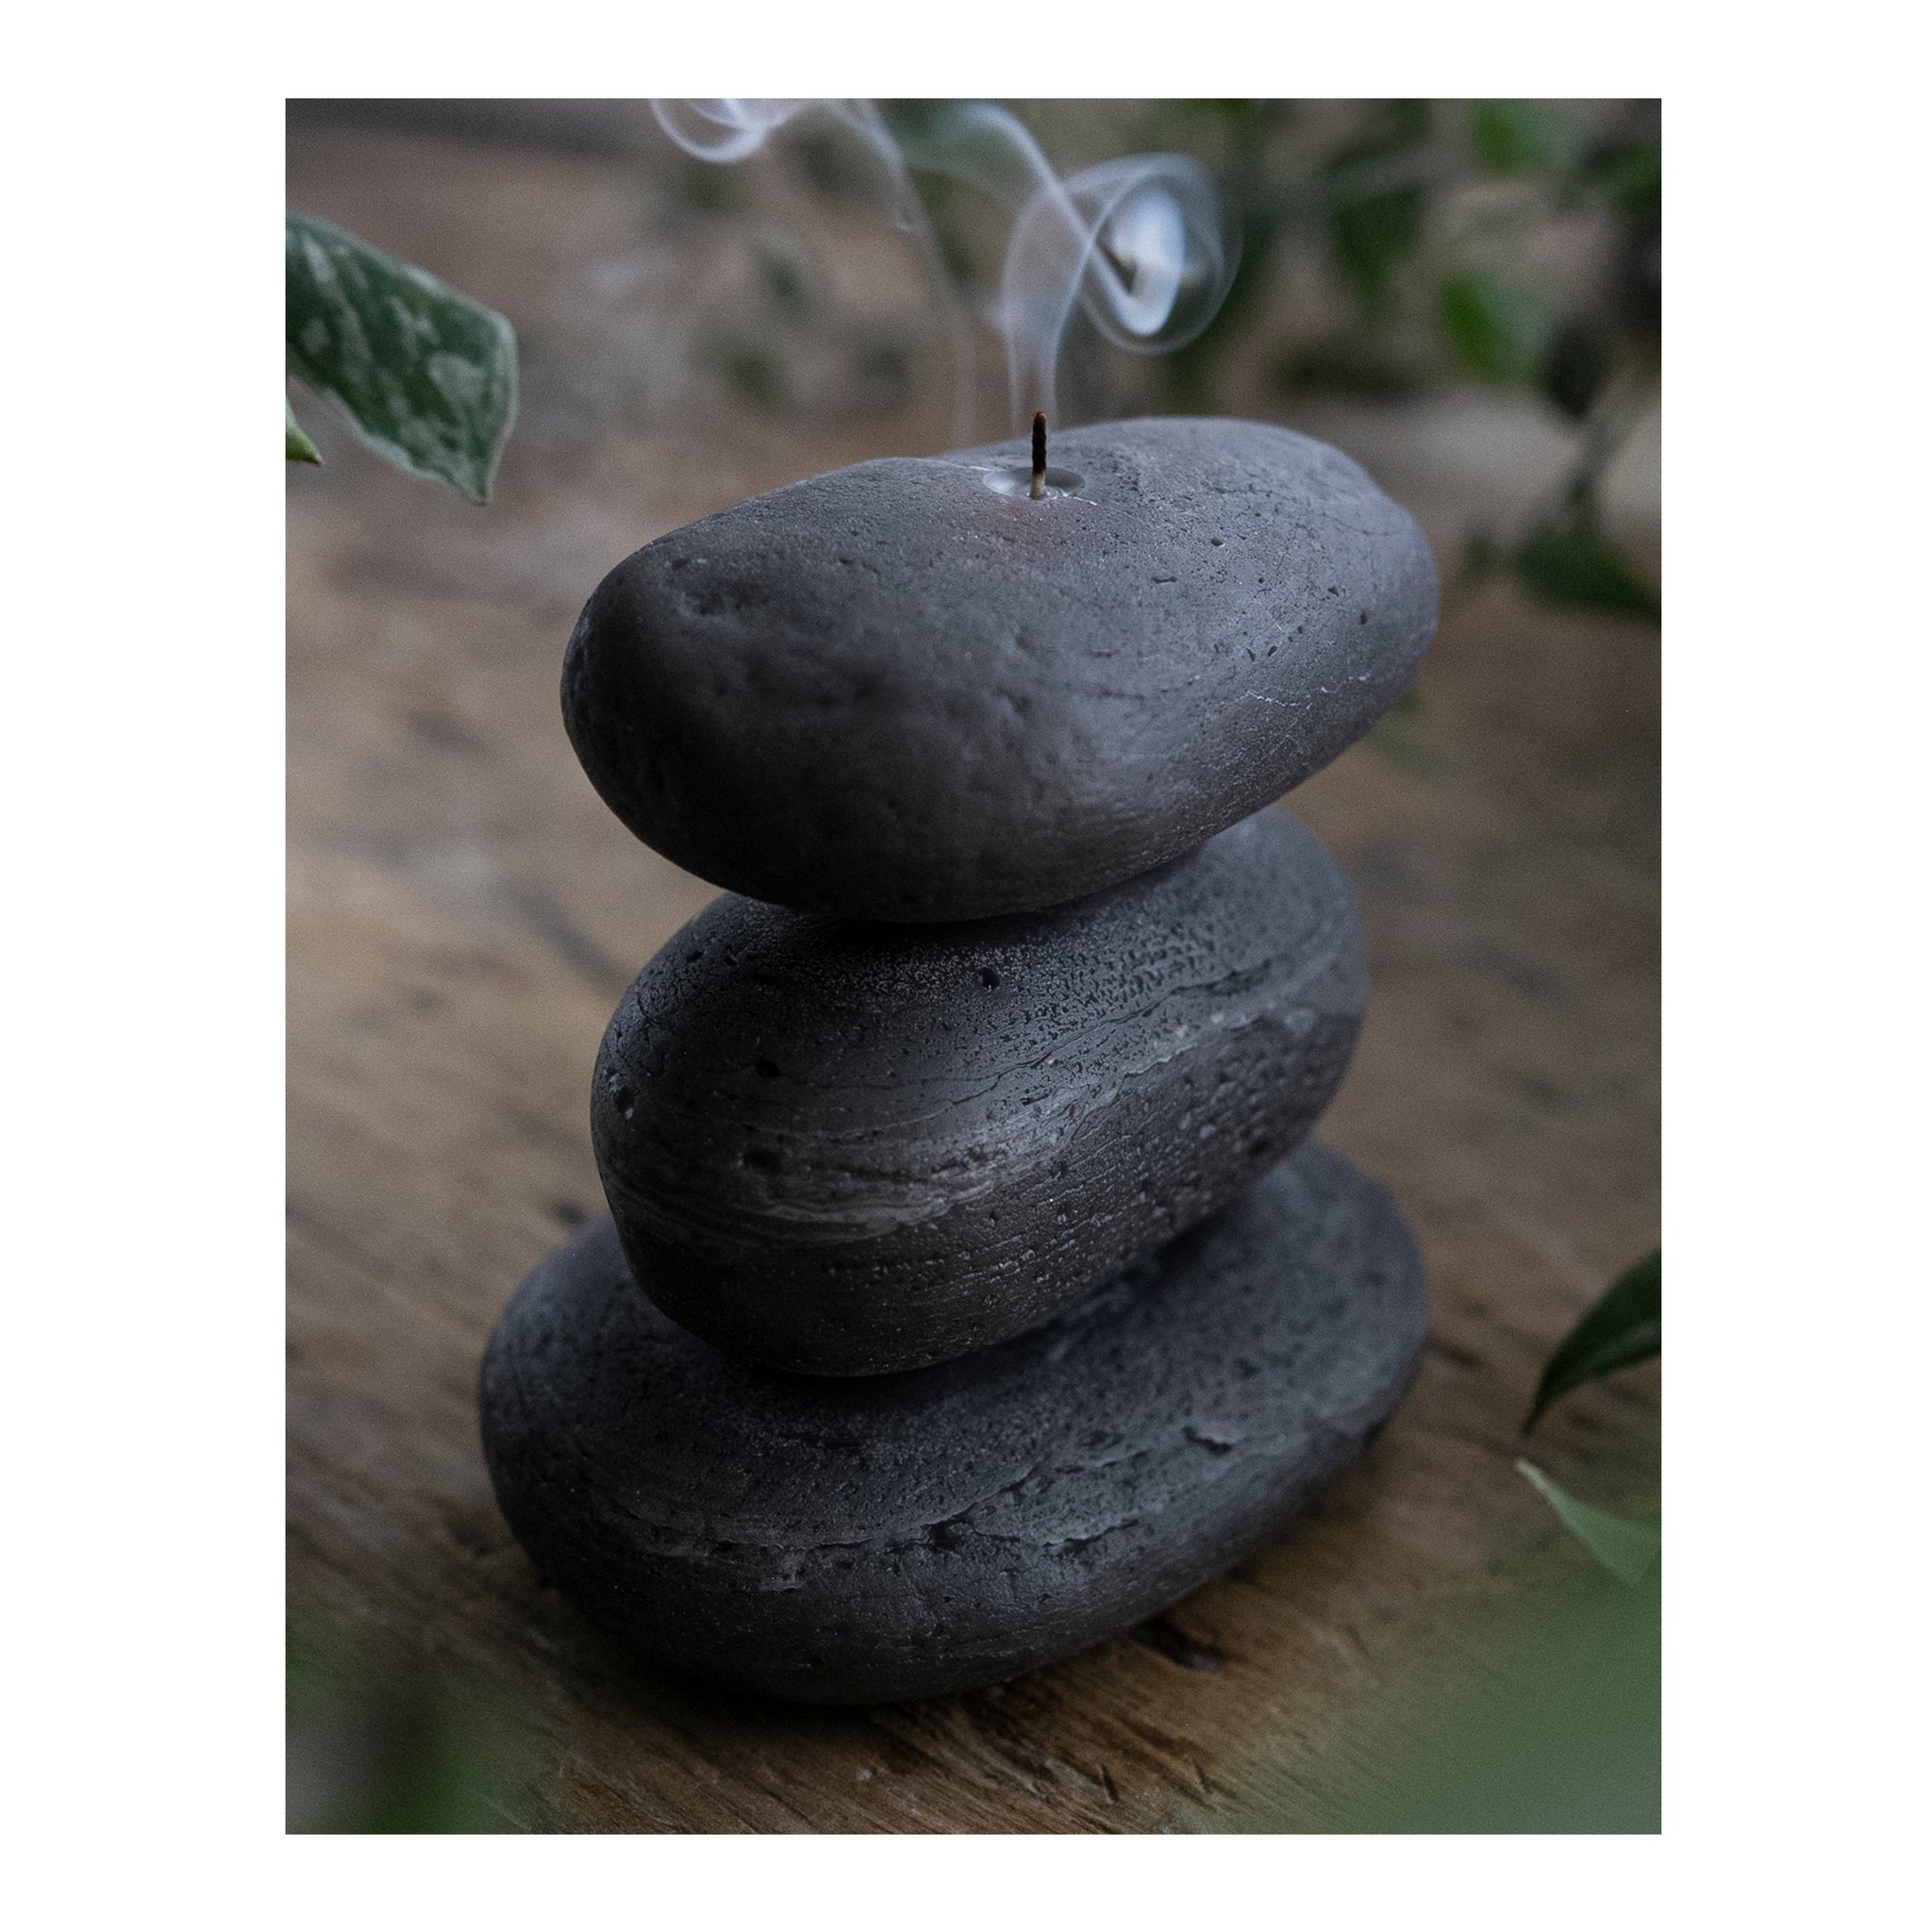 decorative stacked rock